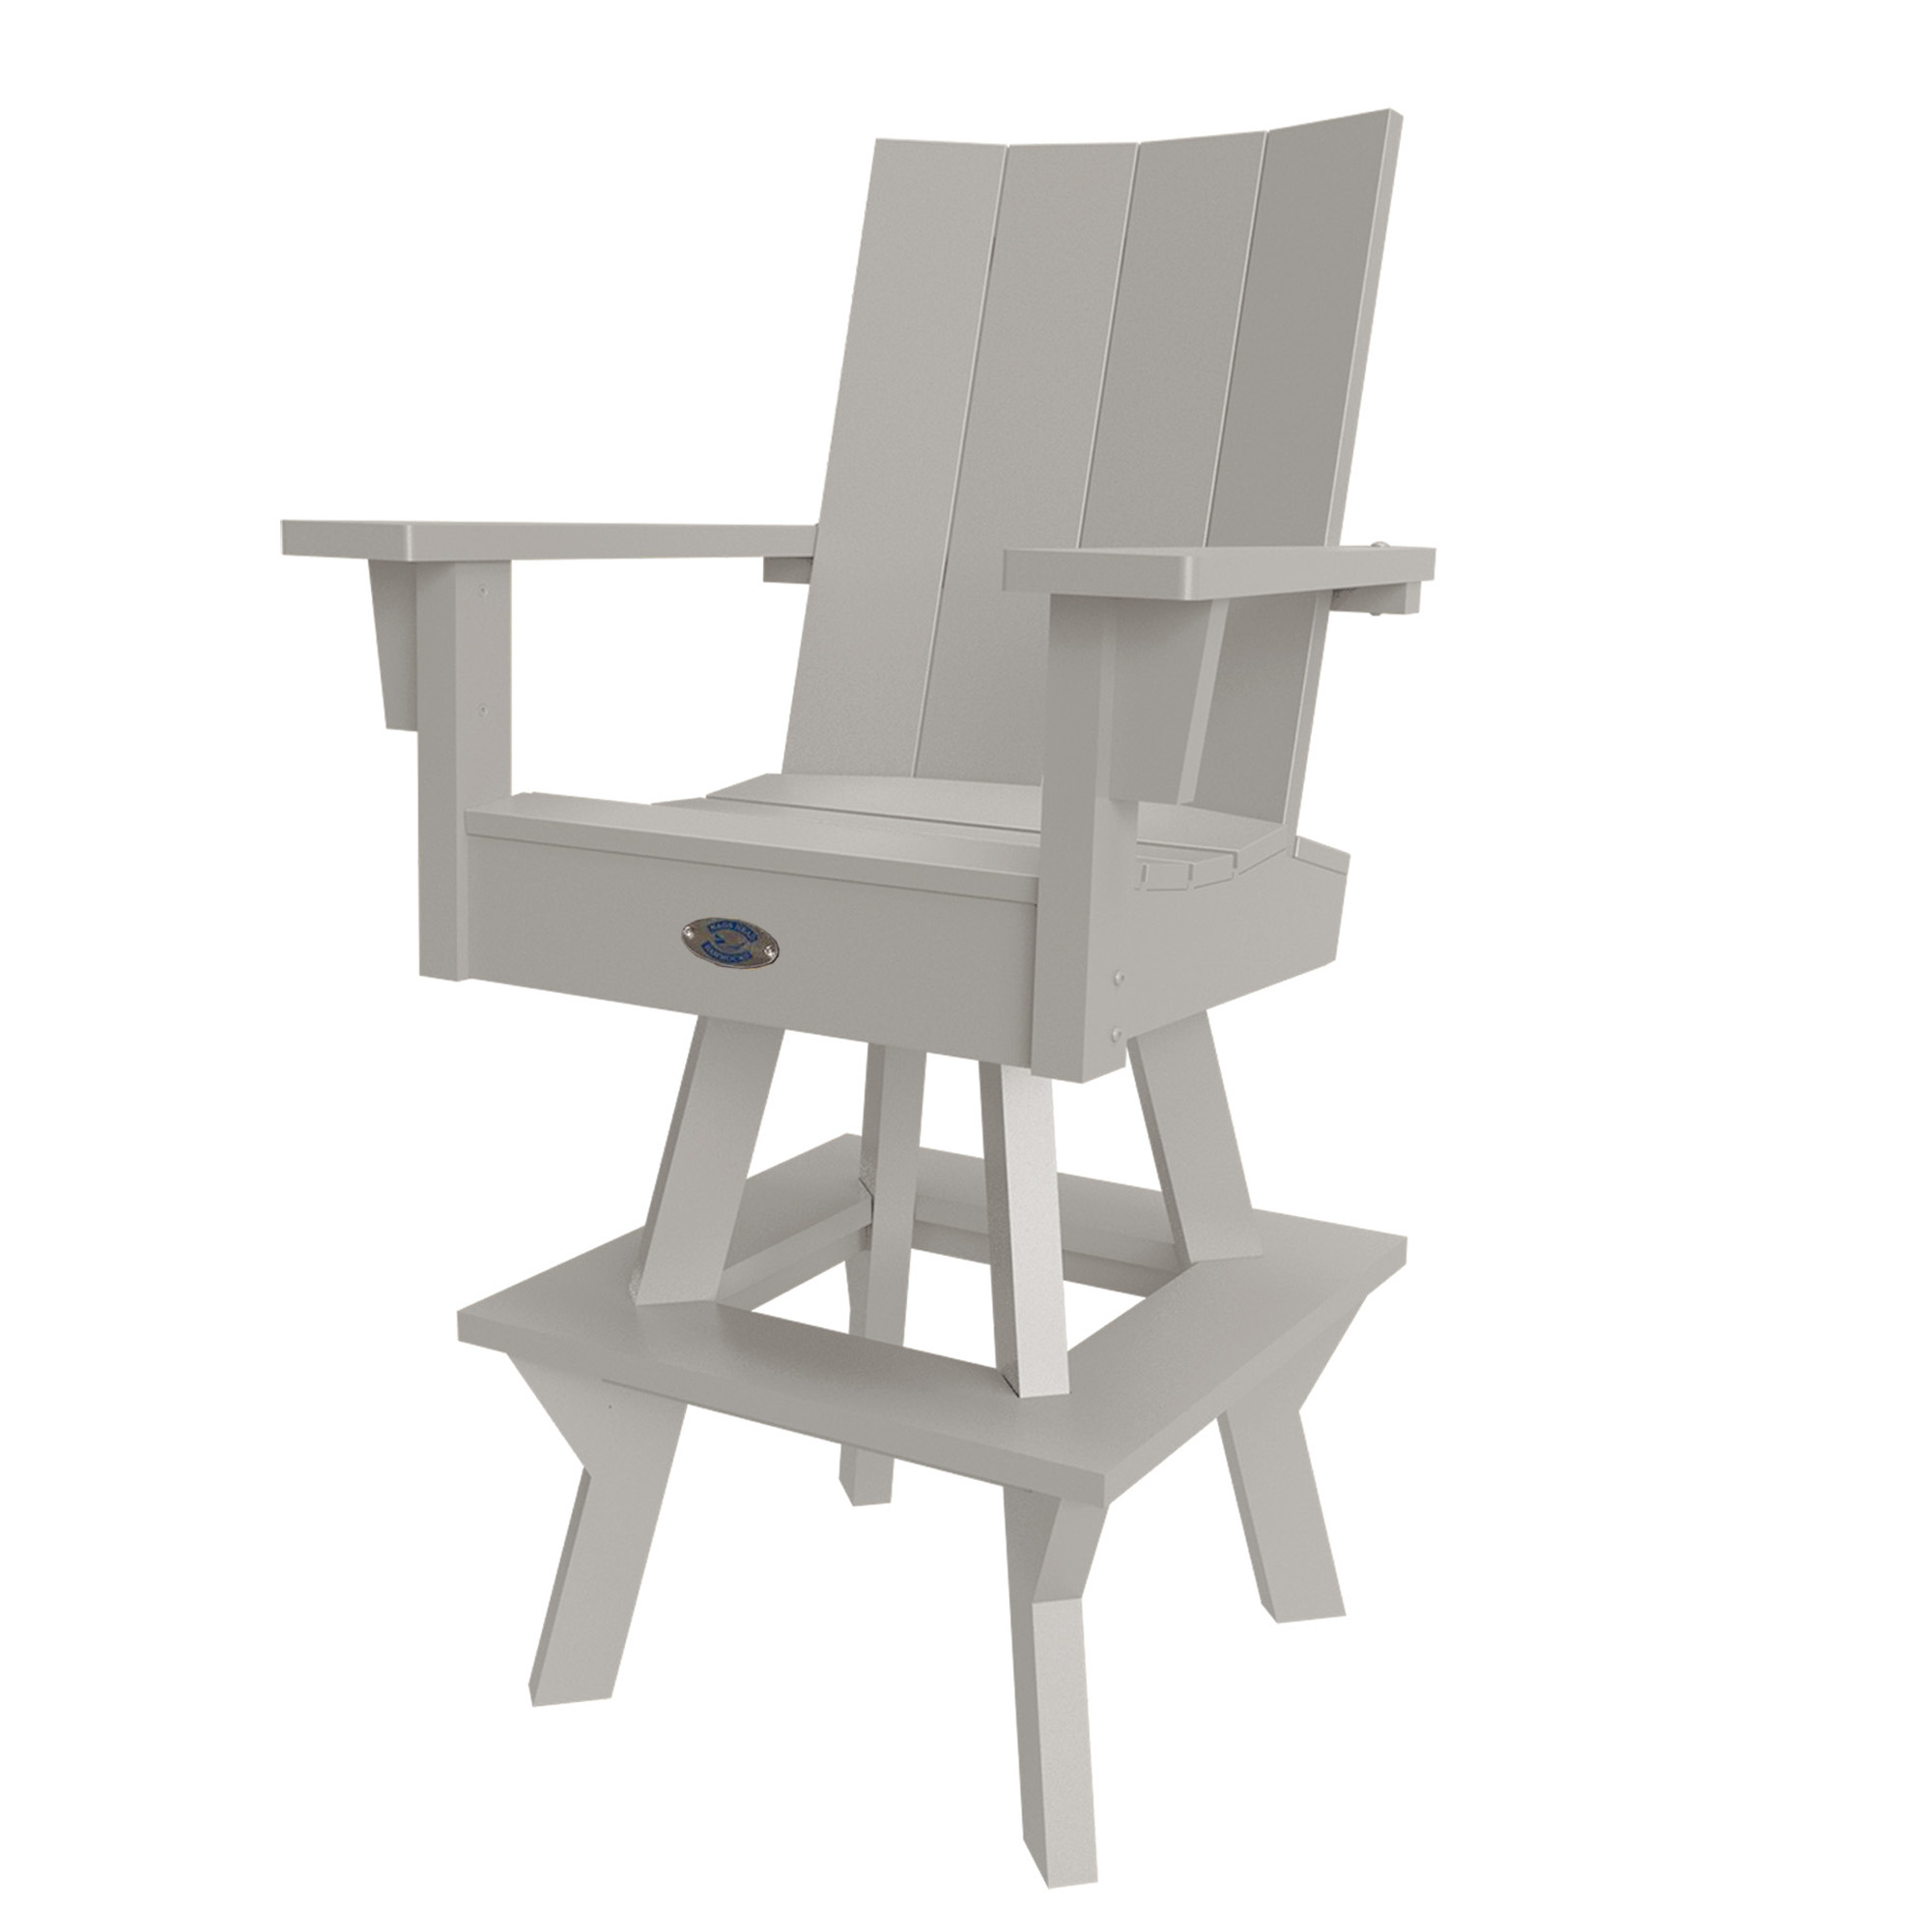 Counter Height Swivel Chair Instructions